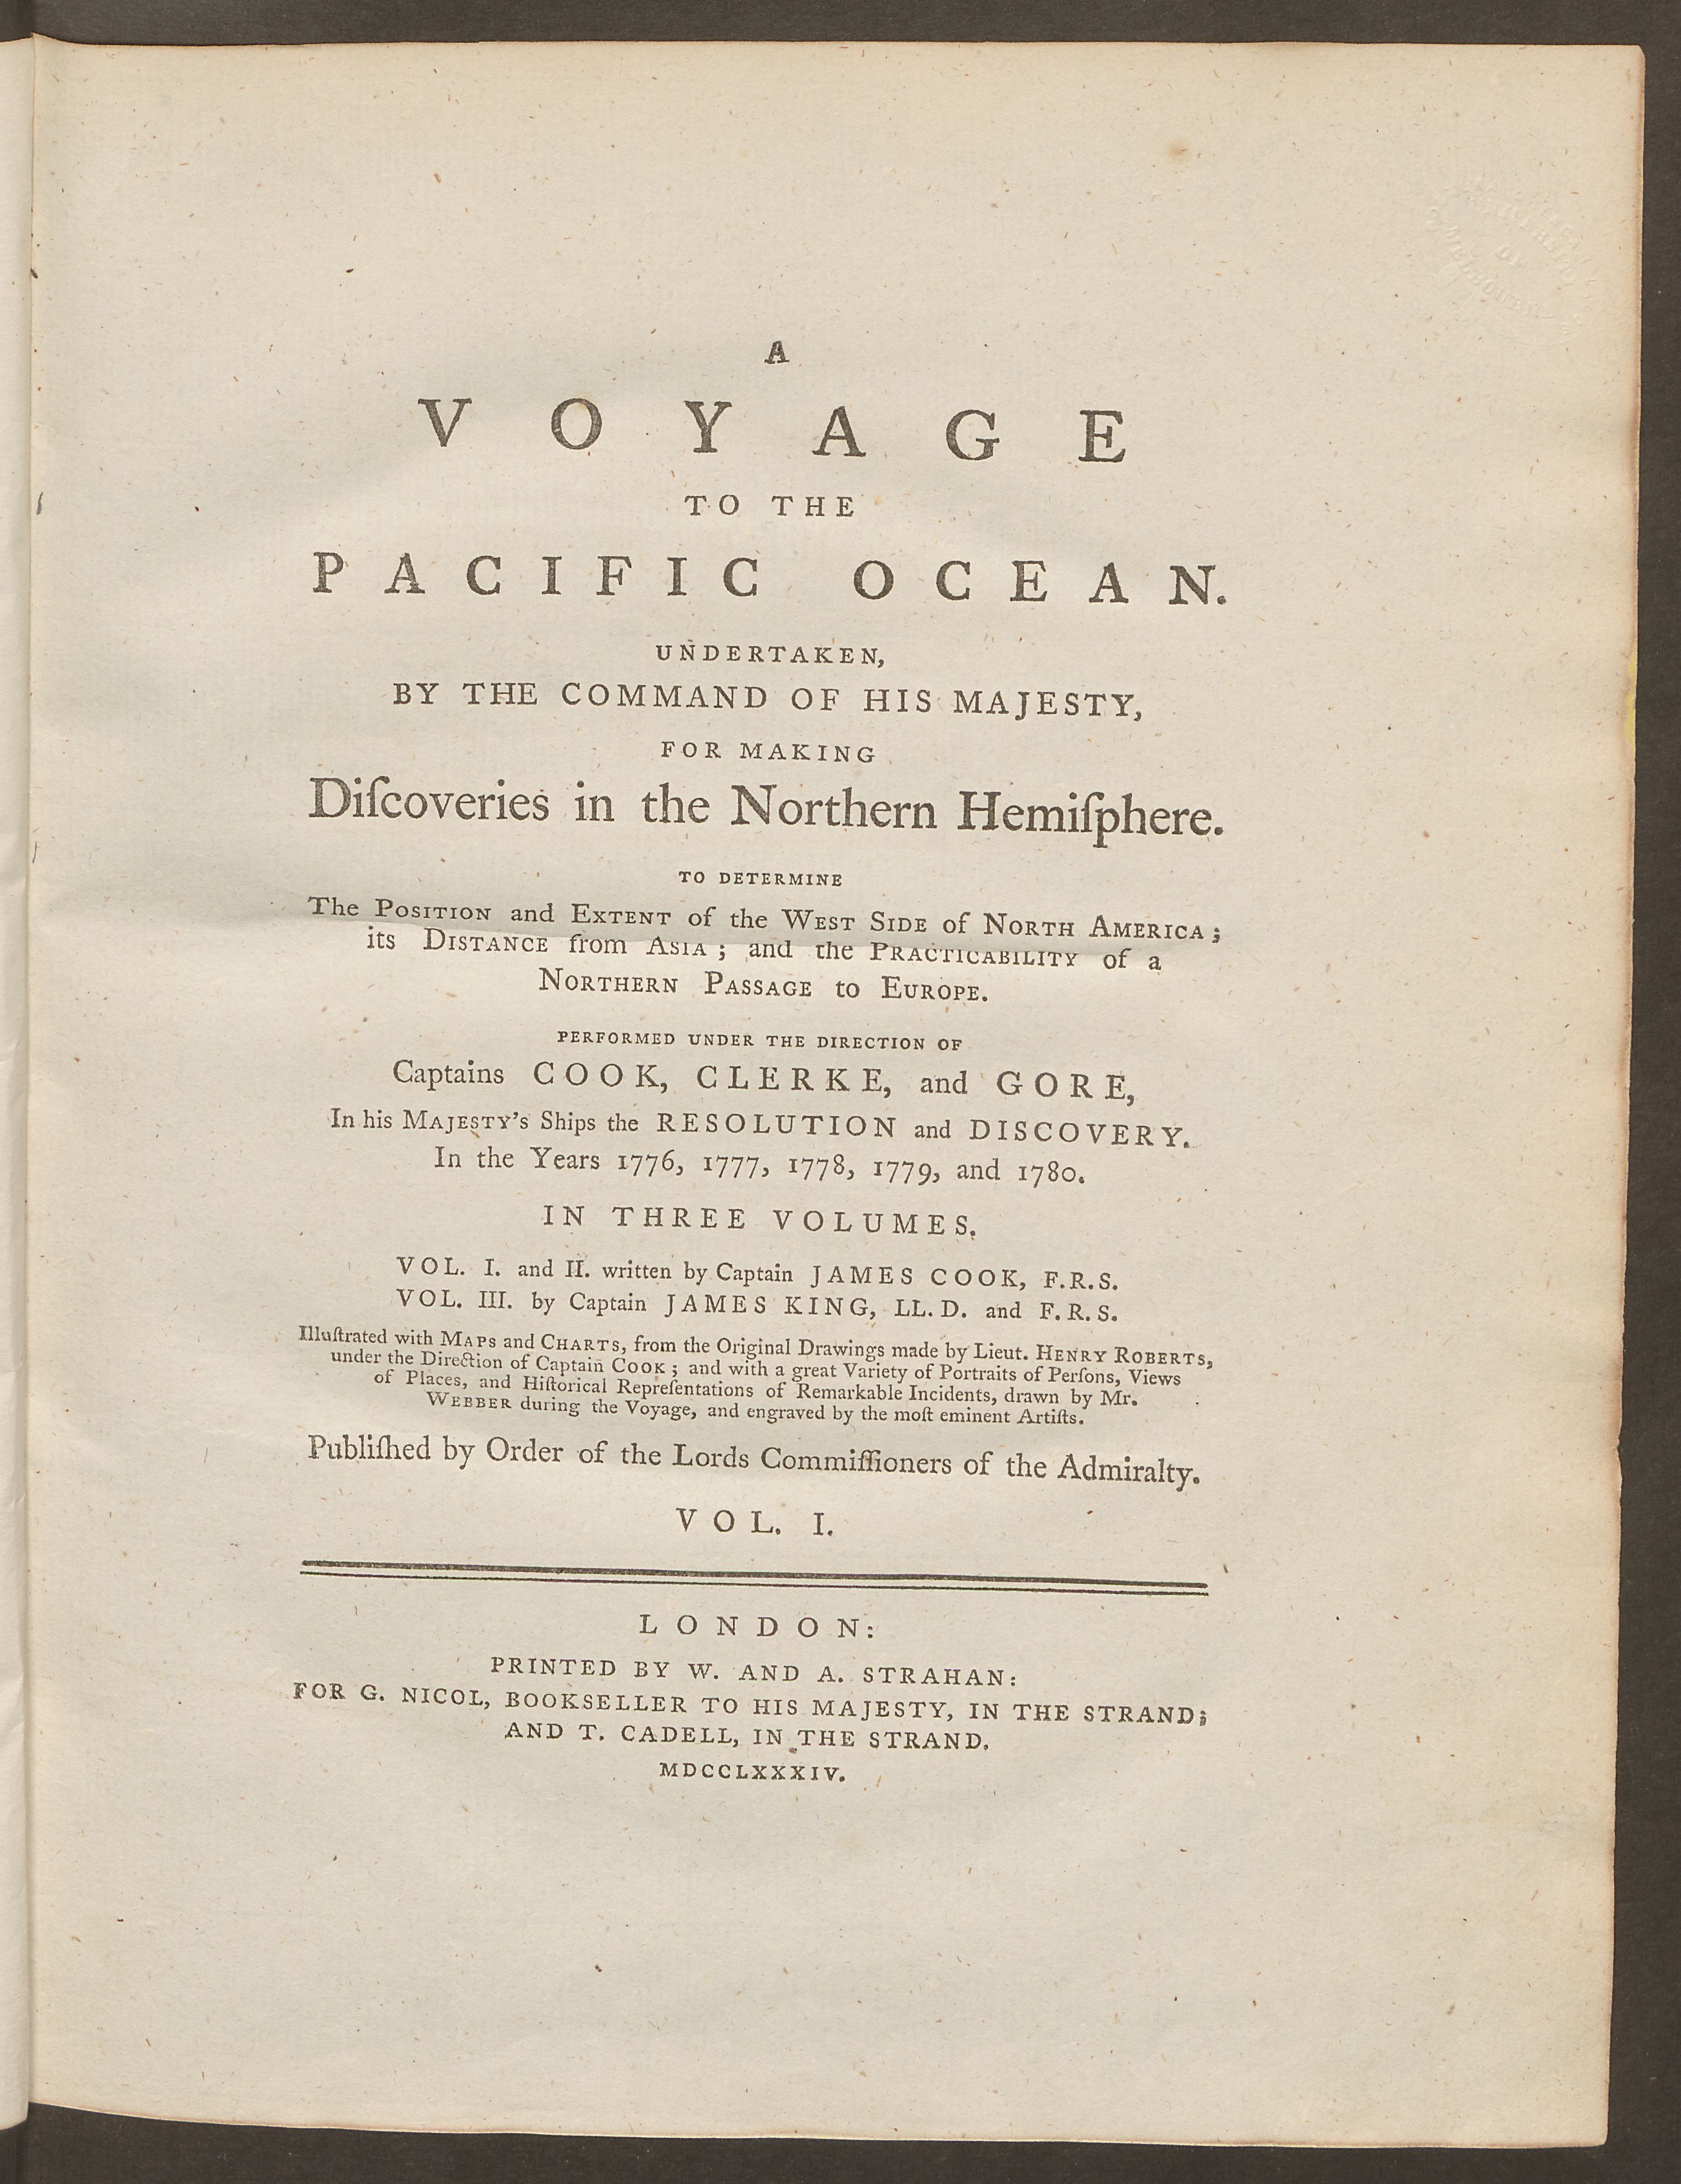 A voyage to the Pacific Ocean